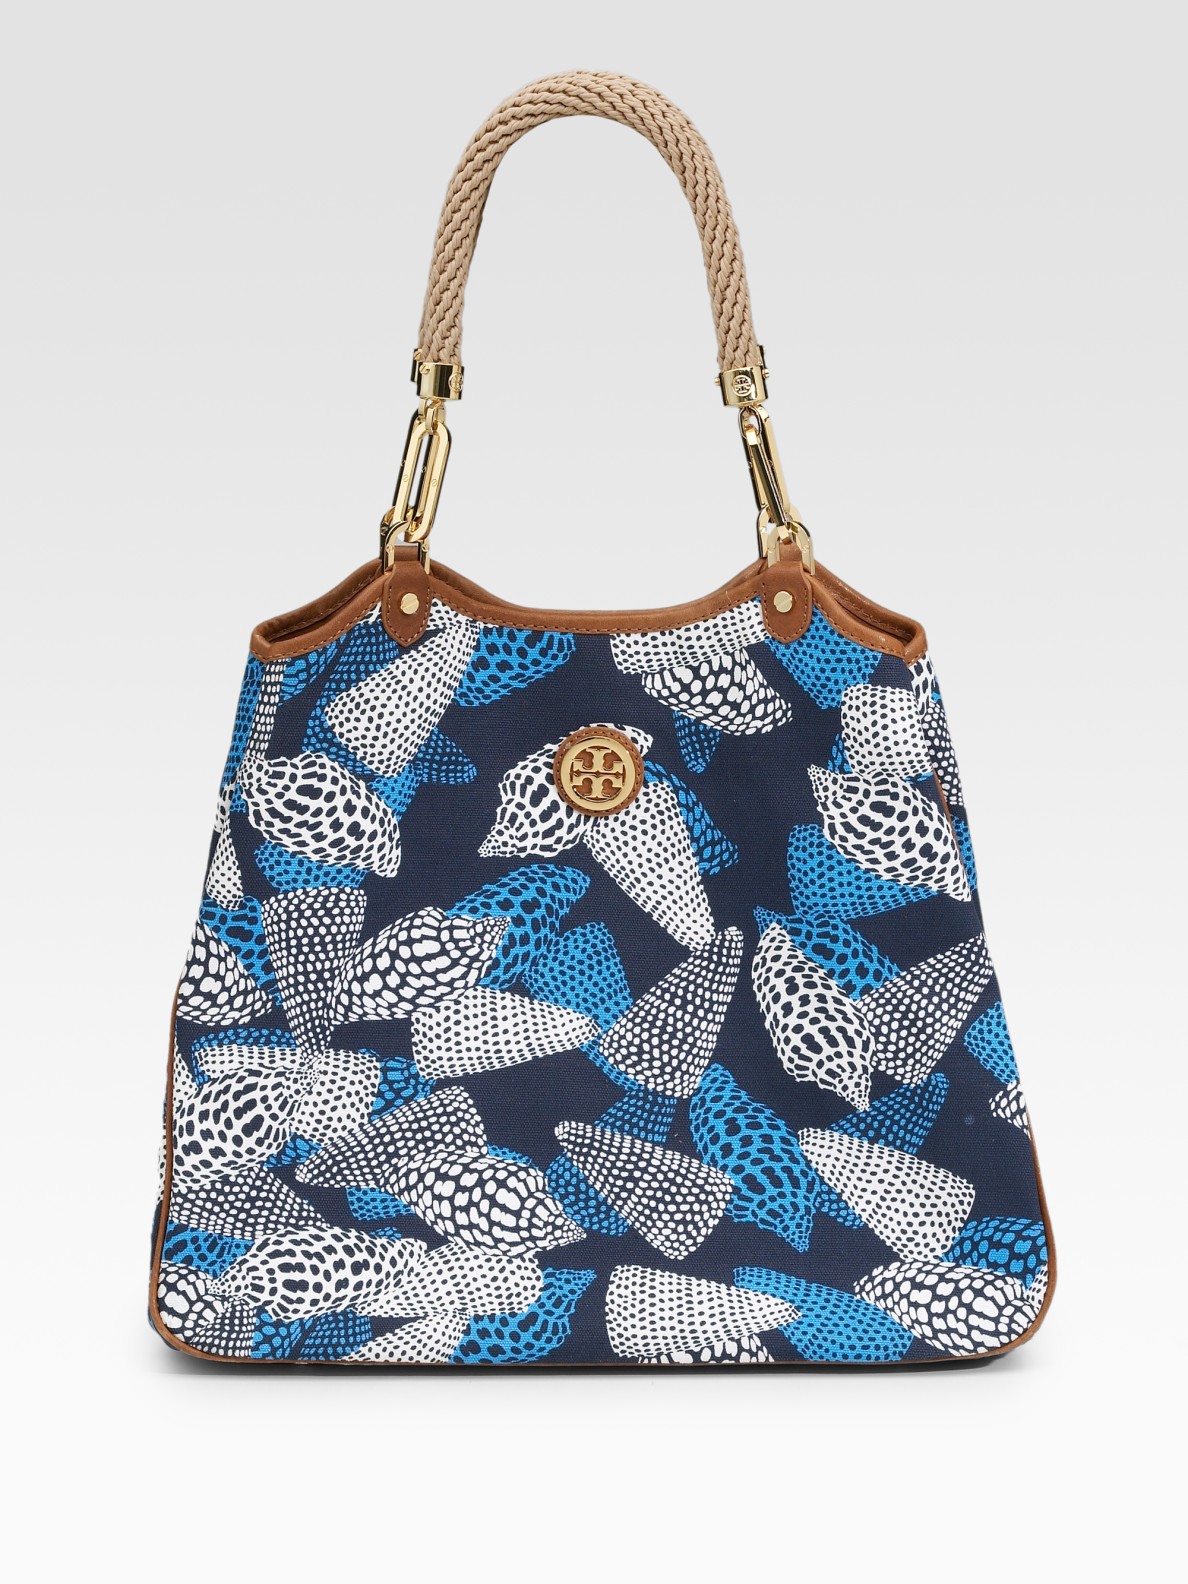 Tory Burch Channing Printed Canvas Tote in Blue | Lyst